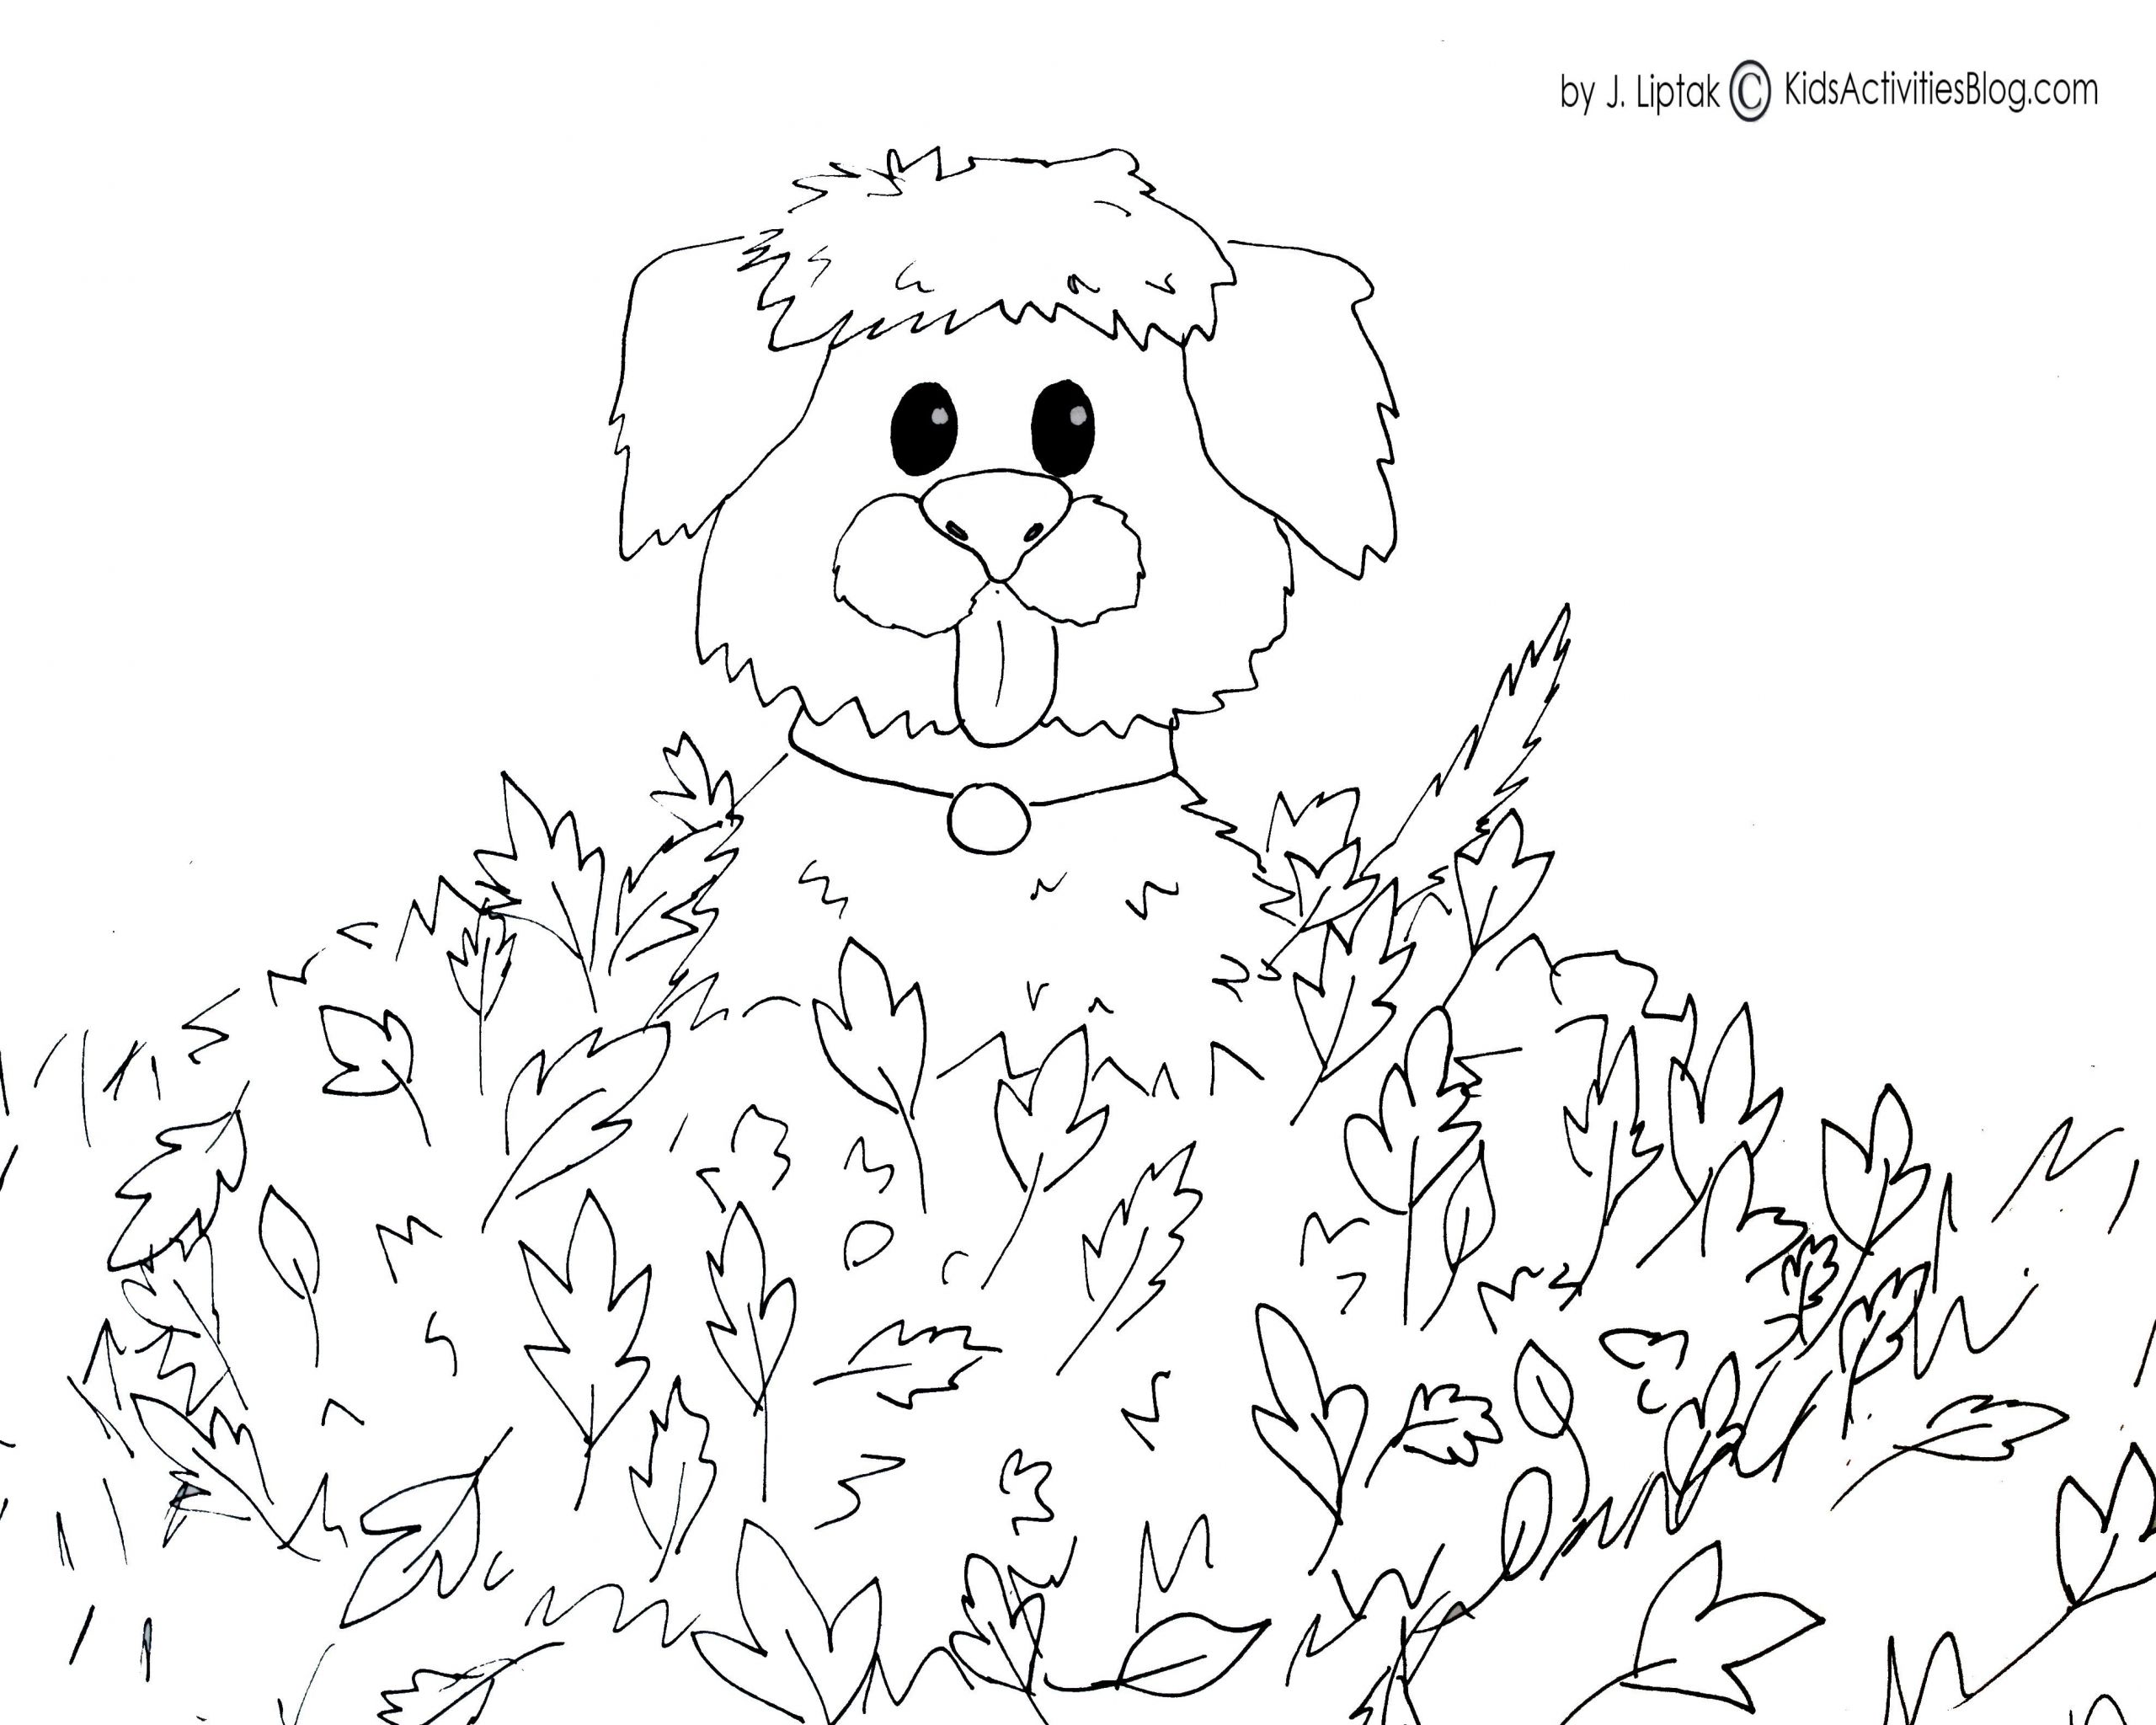 Fall Coloring Pages For Kids
 4 FREE PRINTABLE FALL COLORING PAGES Kids Activities